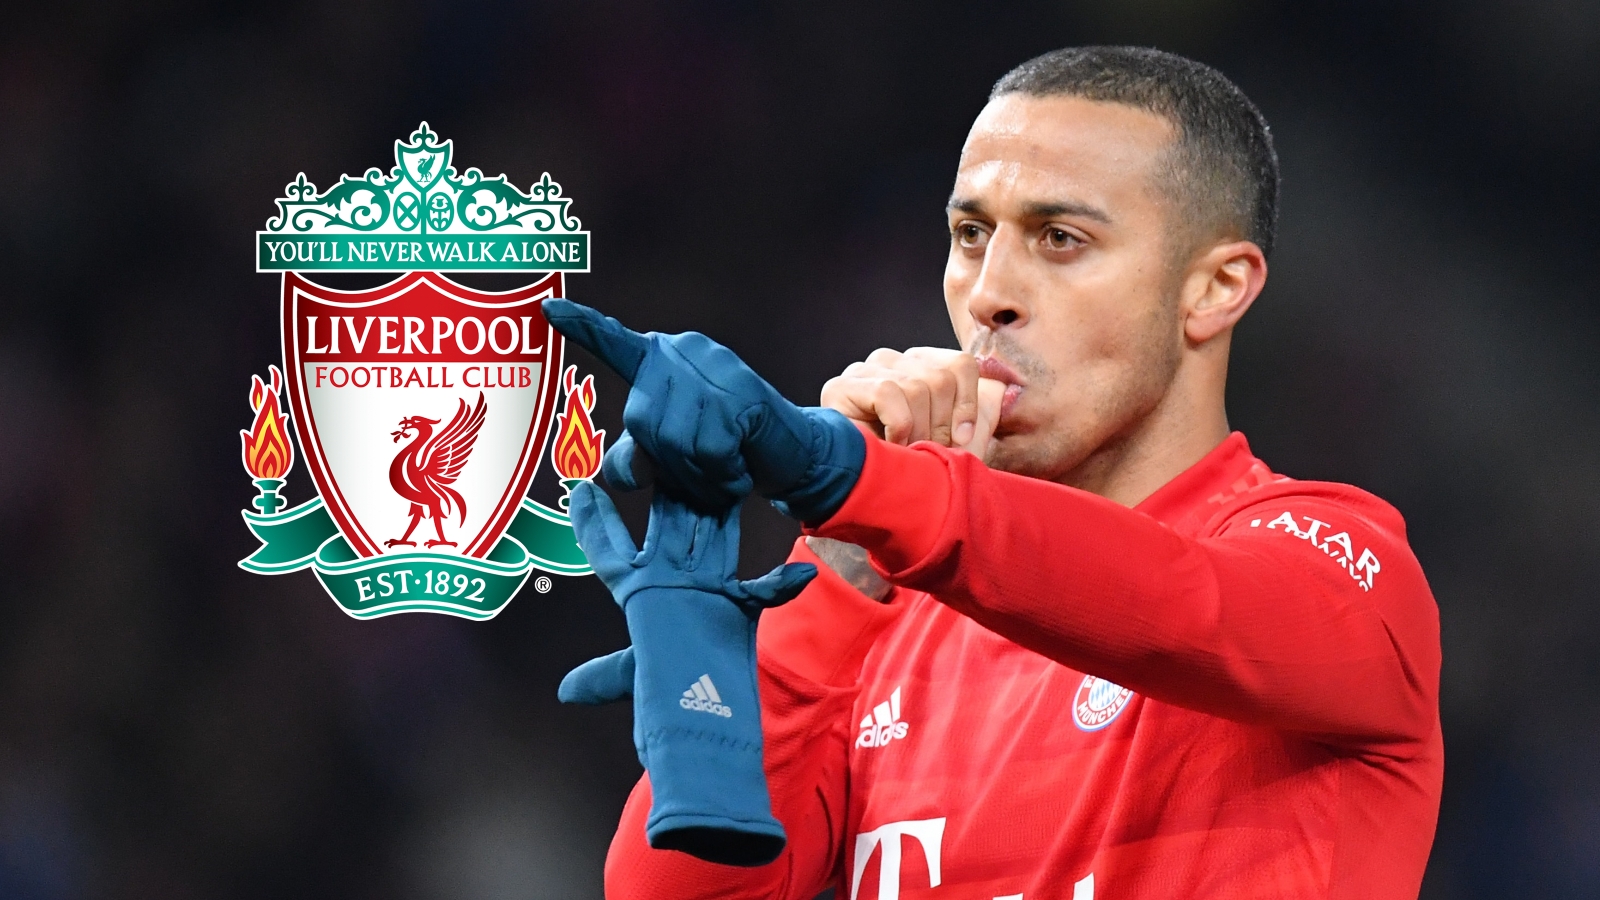 Bayern boss Flick hints at Premier League move for Thiago amid Liverpool links